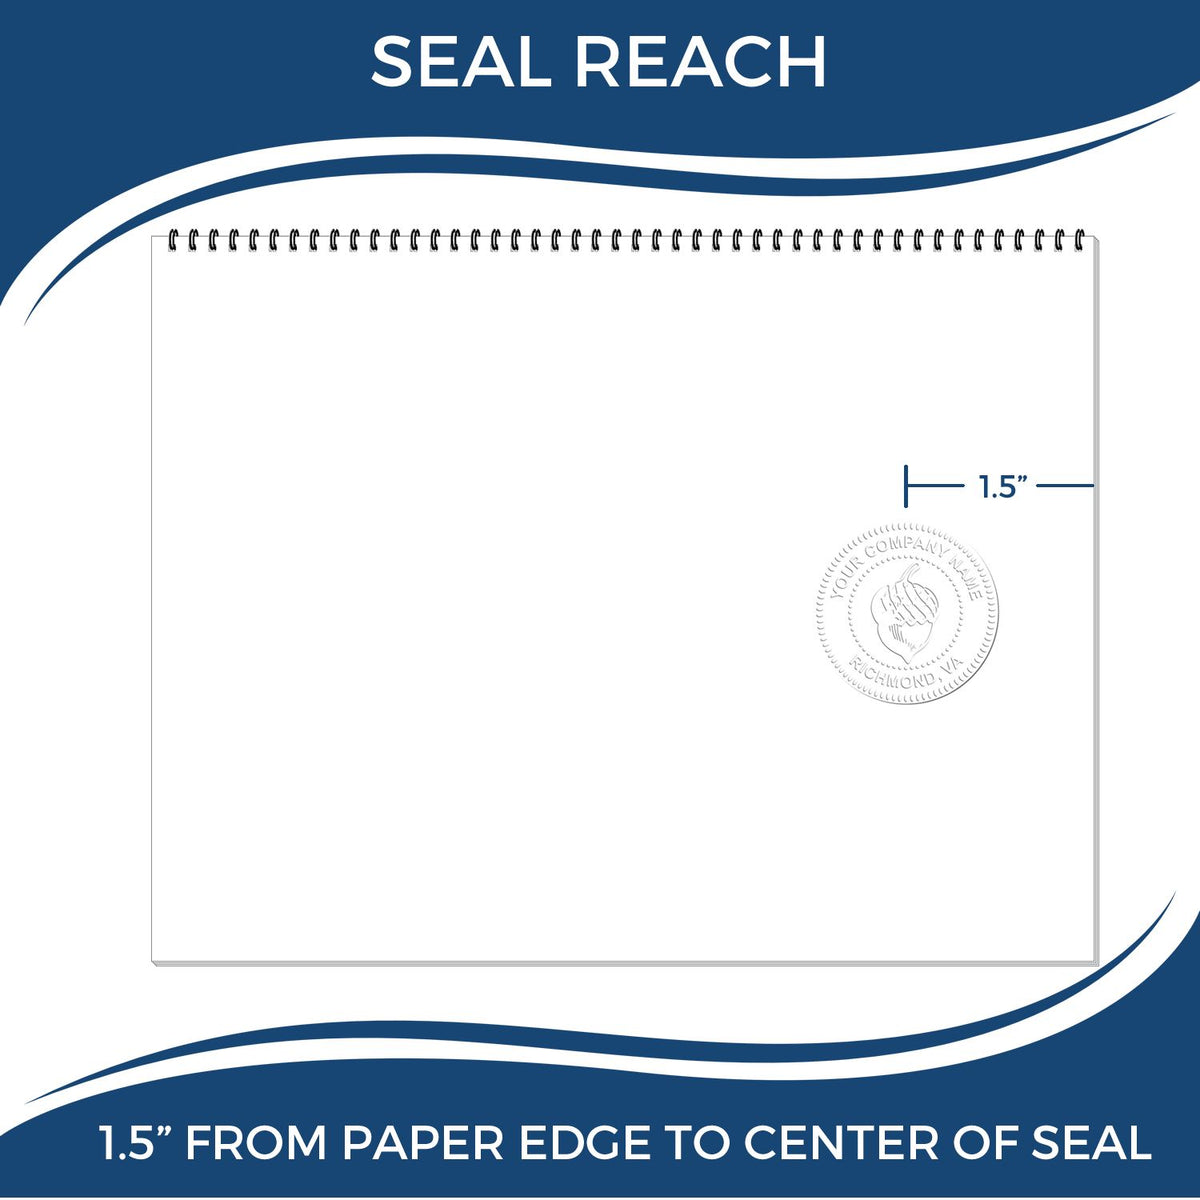 An infographic showing the seal reach which is represented by a ruler and a miniature seal image of the Gift Wyoming Land Surveyor Seal